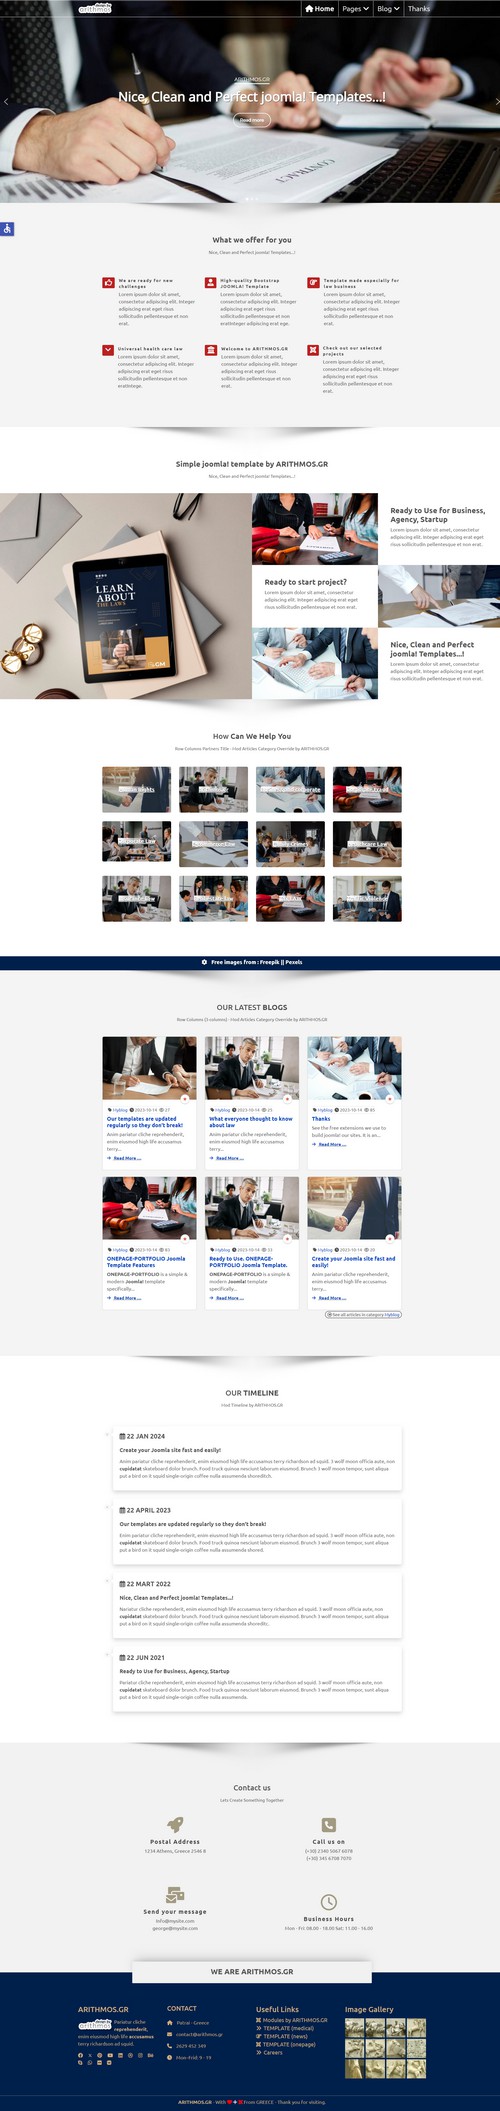 LAW - Patras - Law firms and lawyers Joomla Template